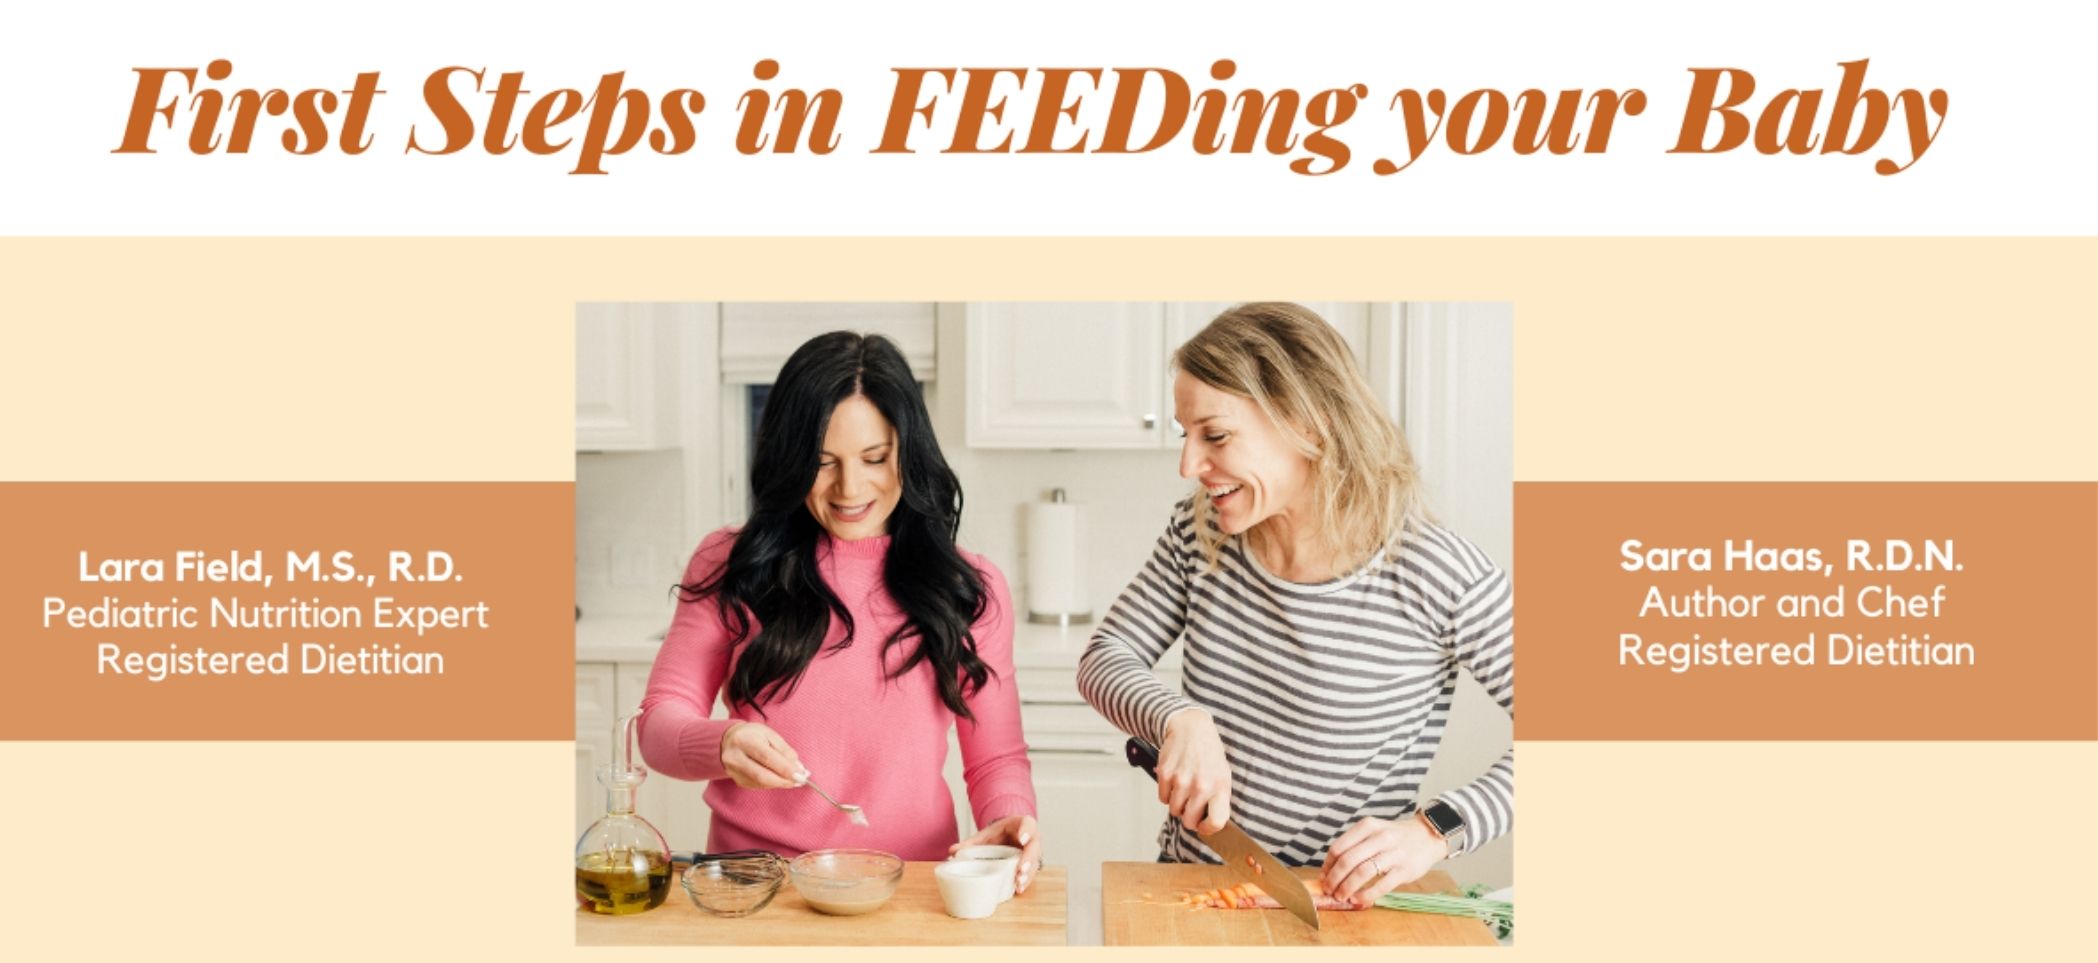 First steps in feeding your baby